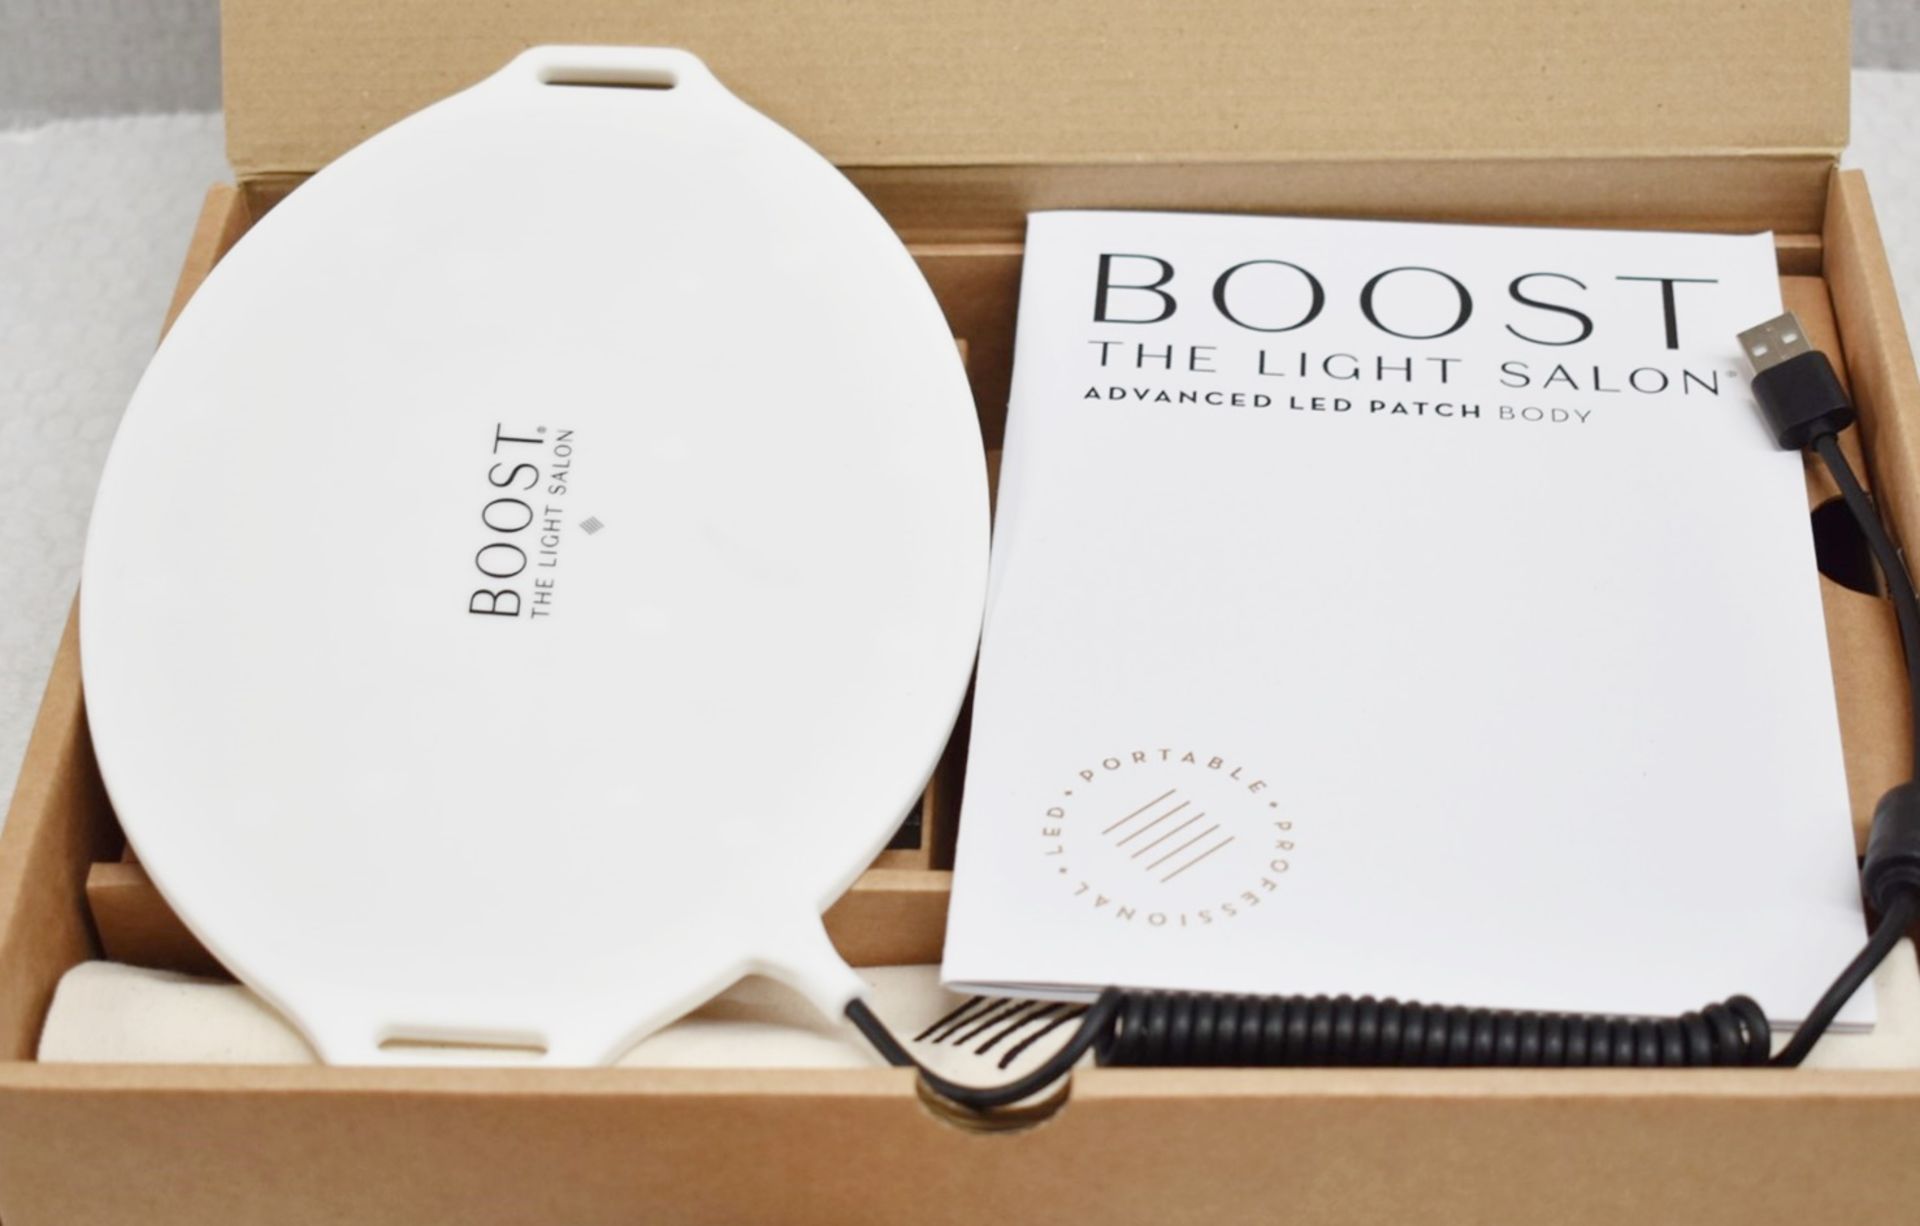 1 x THE LIGHT SALON 'Boost' Anti-inflammatory LED Body Patch - Original Price £375.00 - Unused Boxed - Image 3 of 9